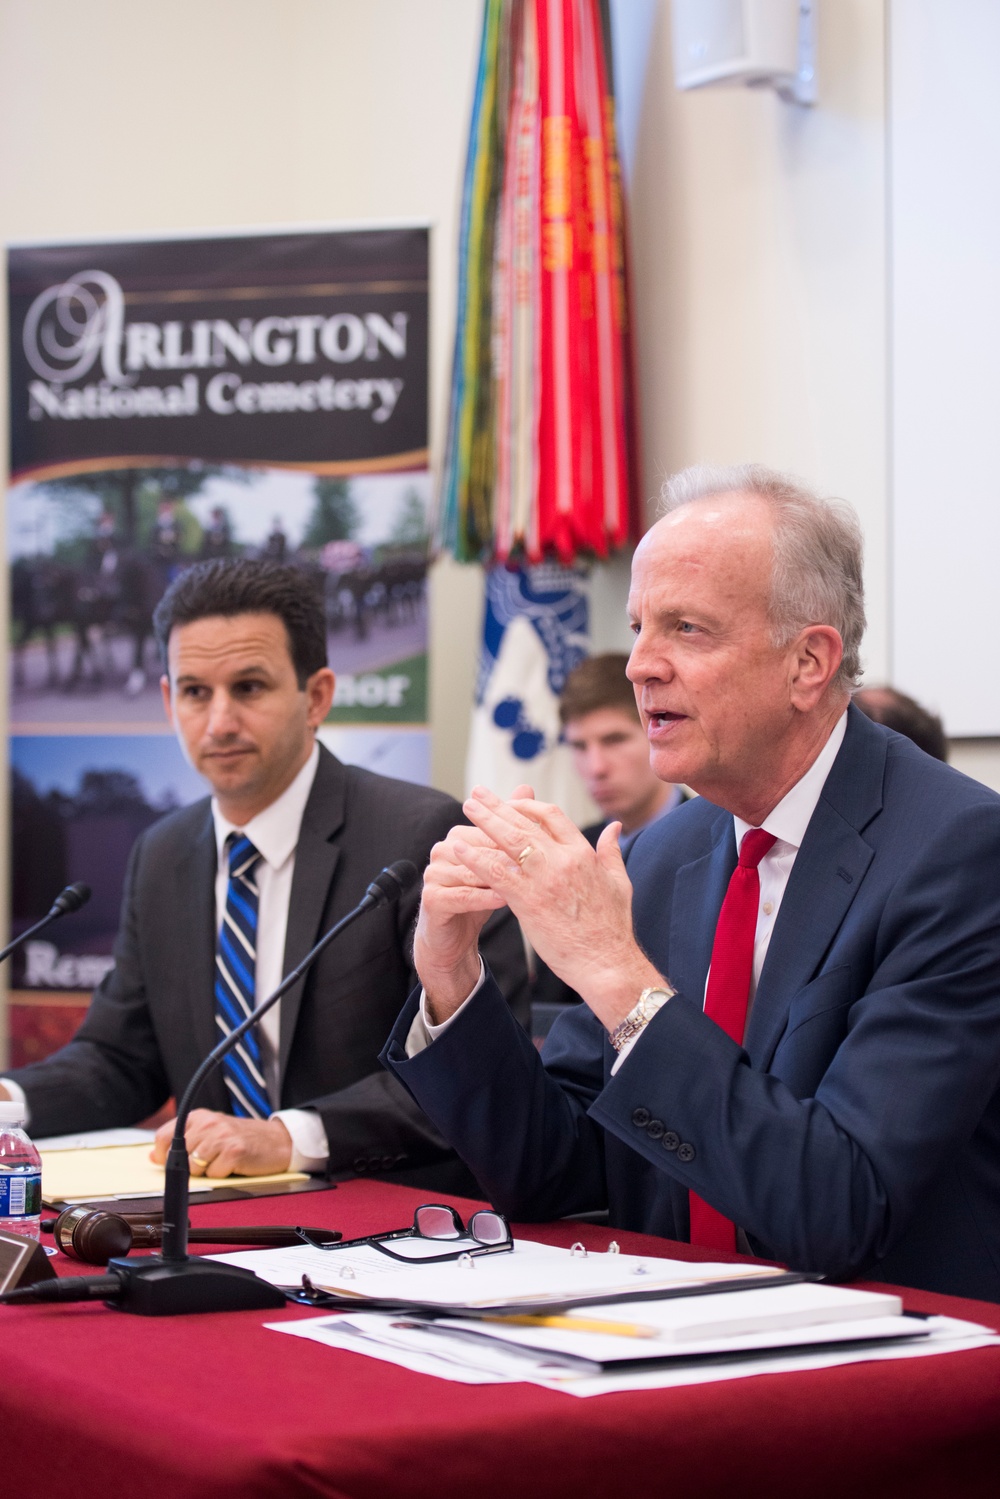 The U.S. Senate subcommittee on Military Construction, Veterans Affairs, and Related Agencies conducted a field hearing at Arlington National Cemetery